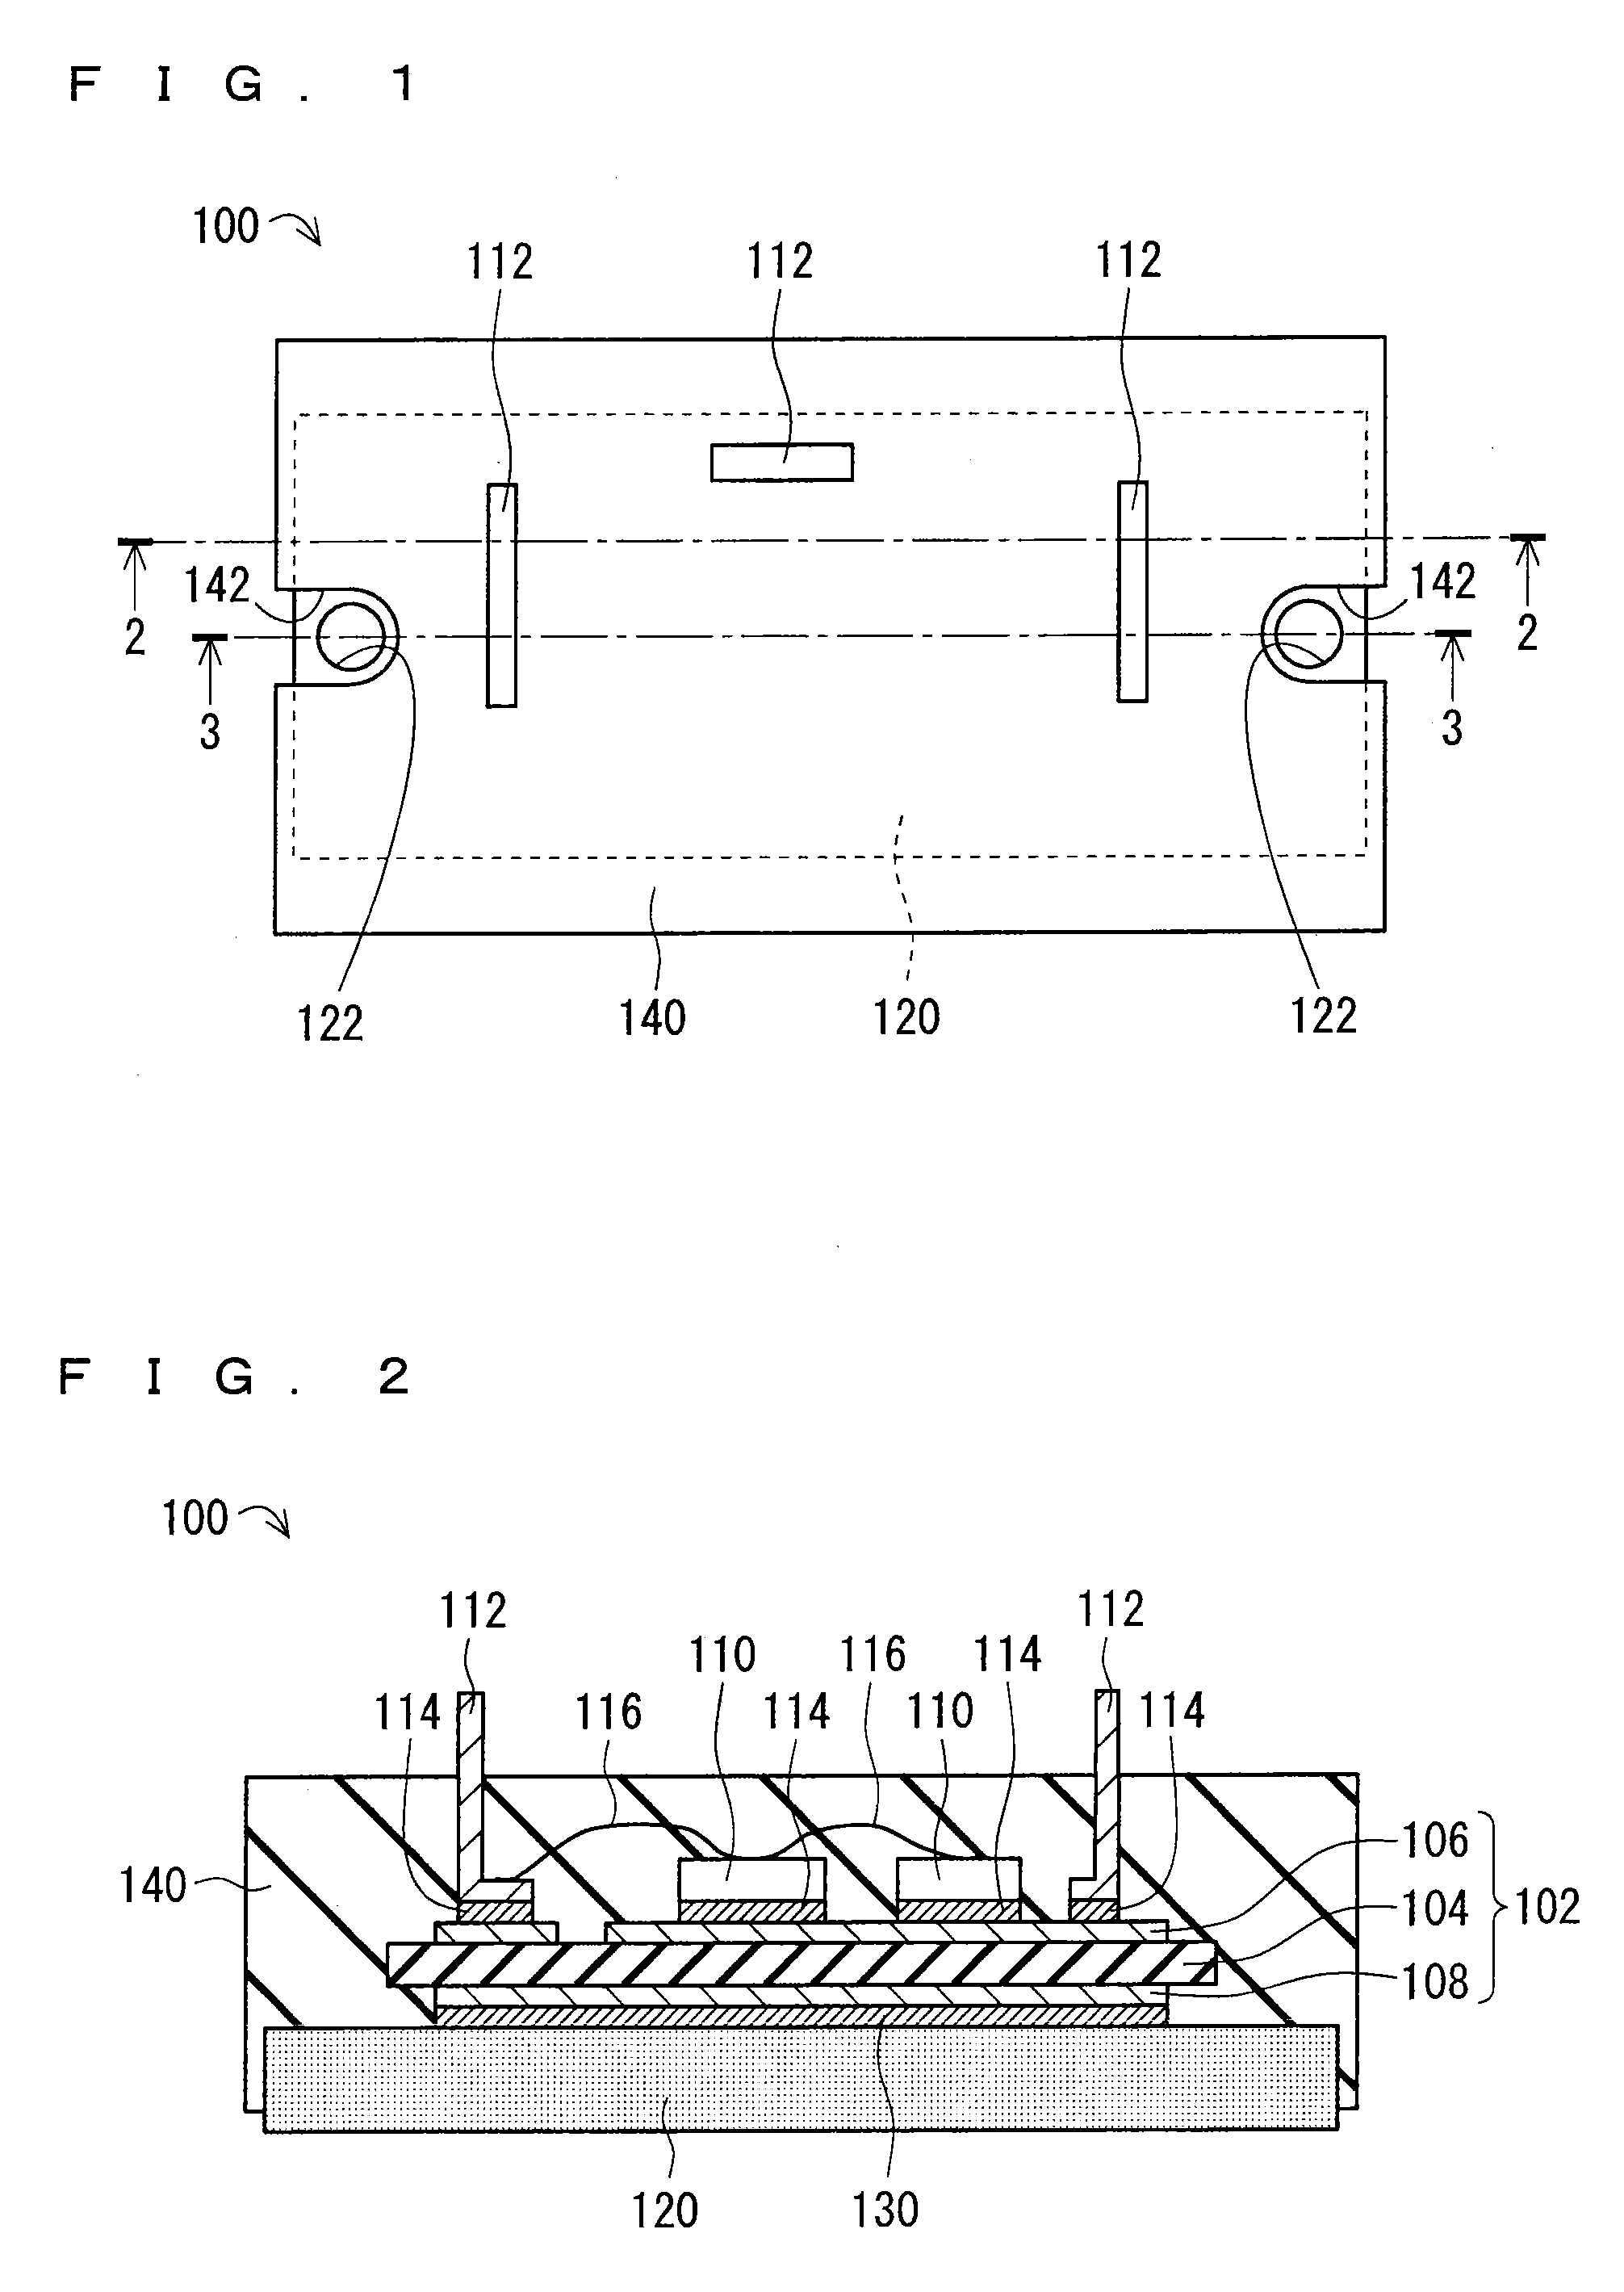 Semiconductor device